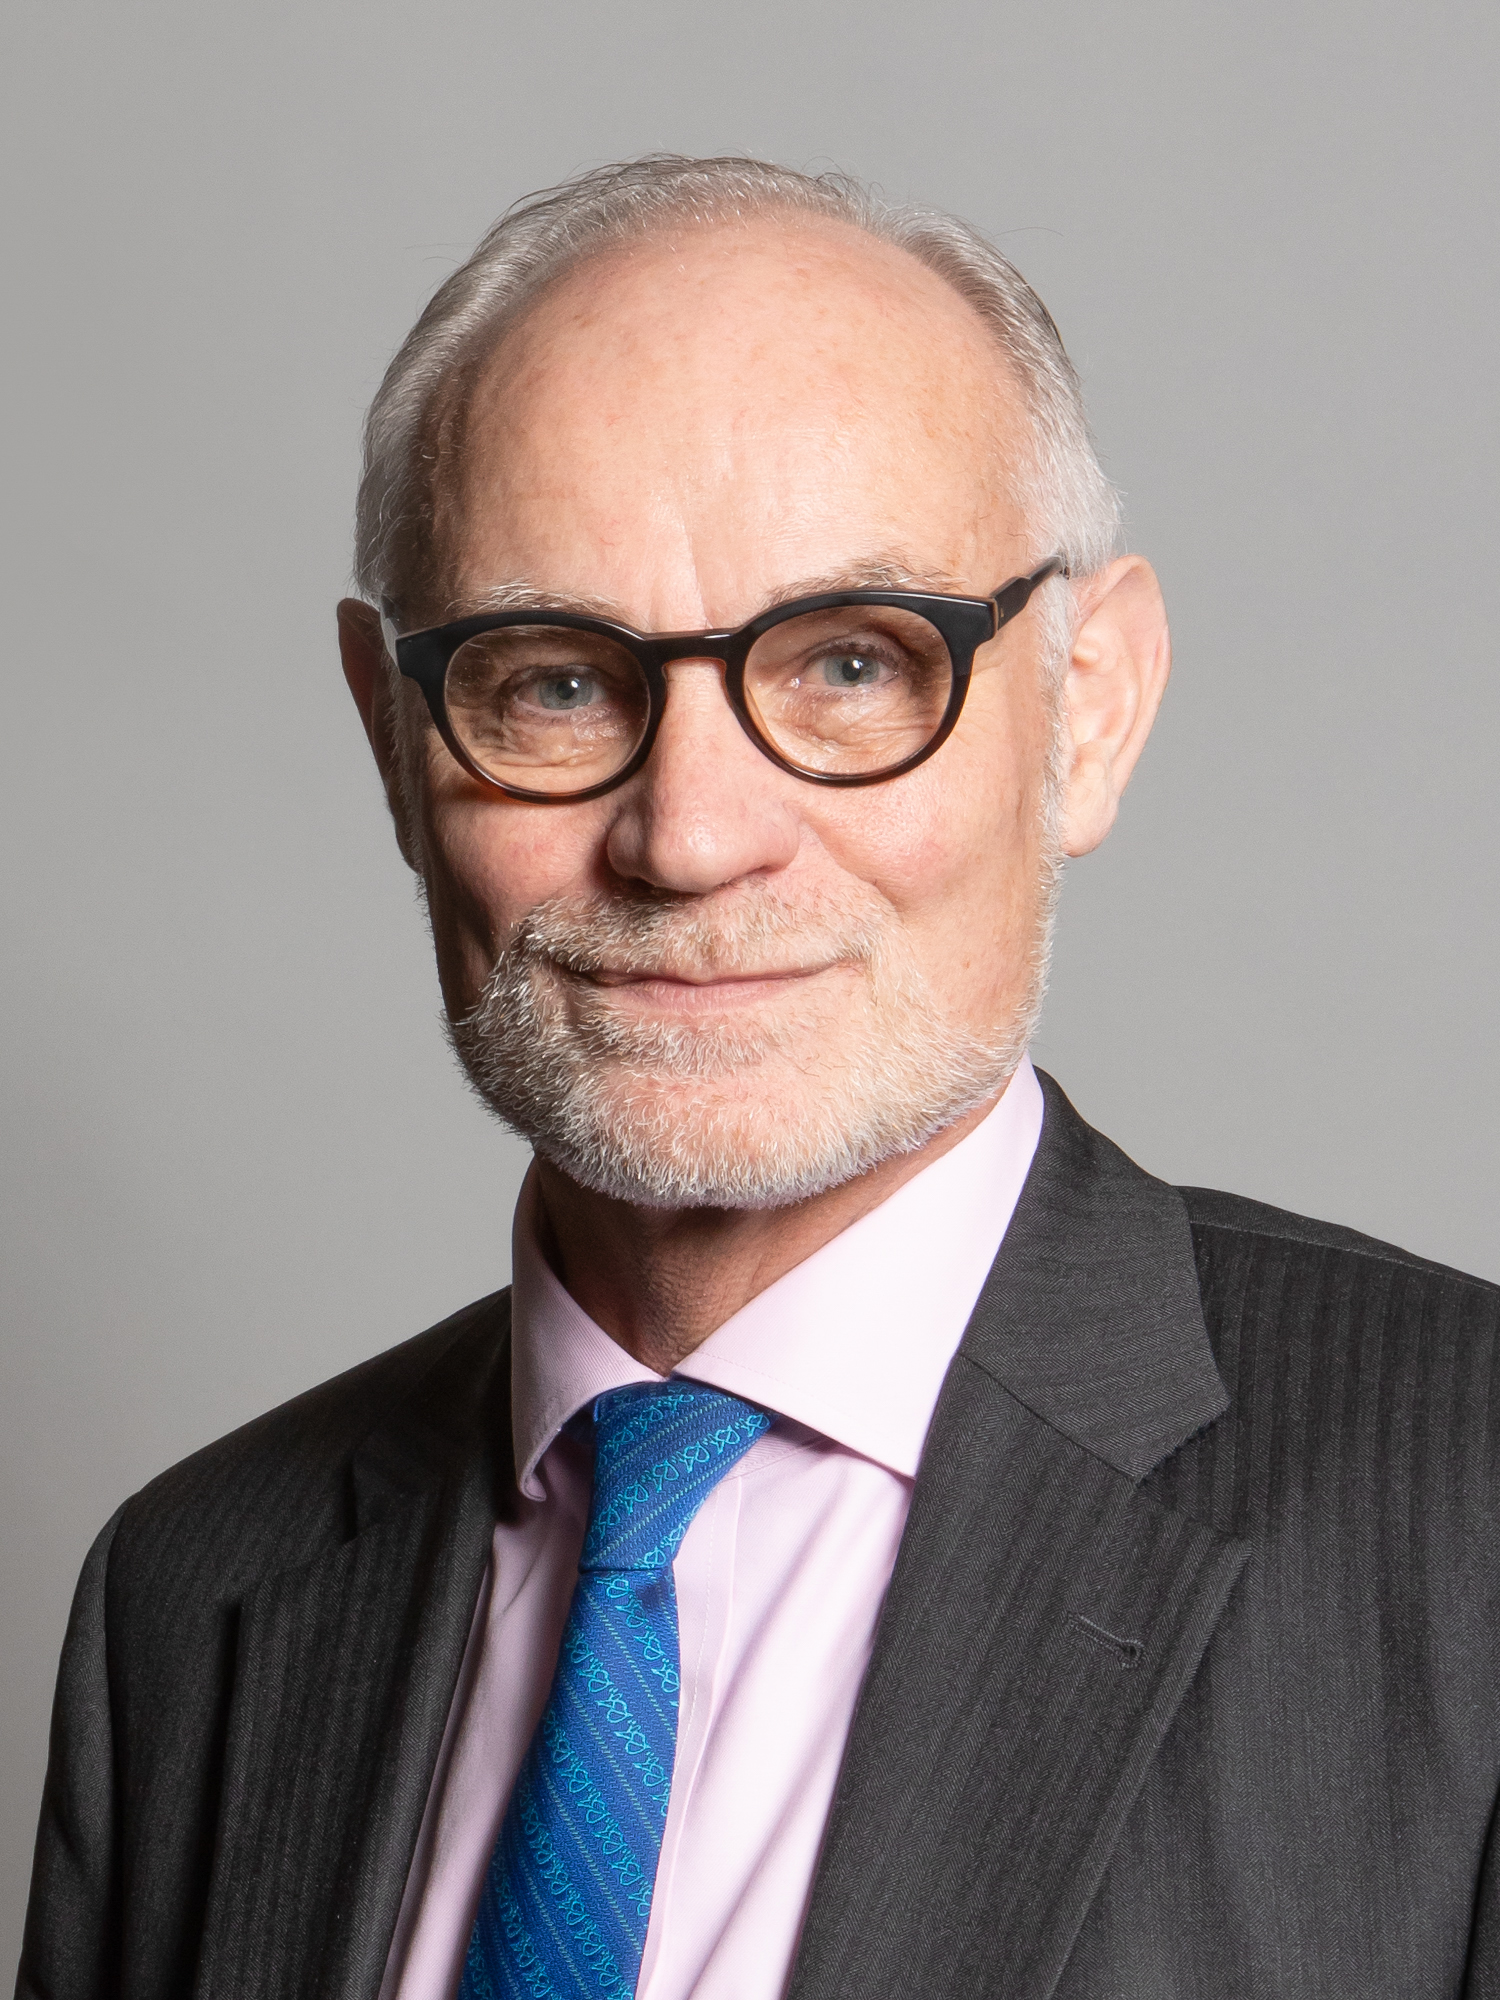 Crispin Blunt has been nominated for Politician of the Year at the PinkNews Awards 2020 